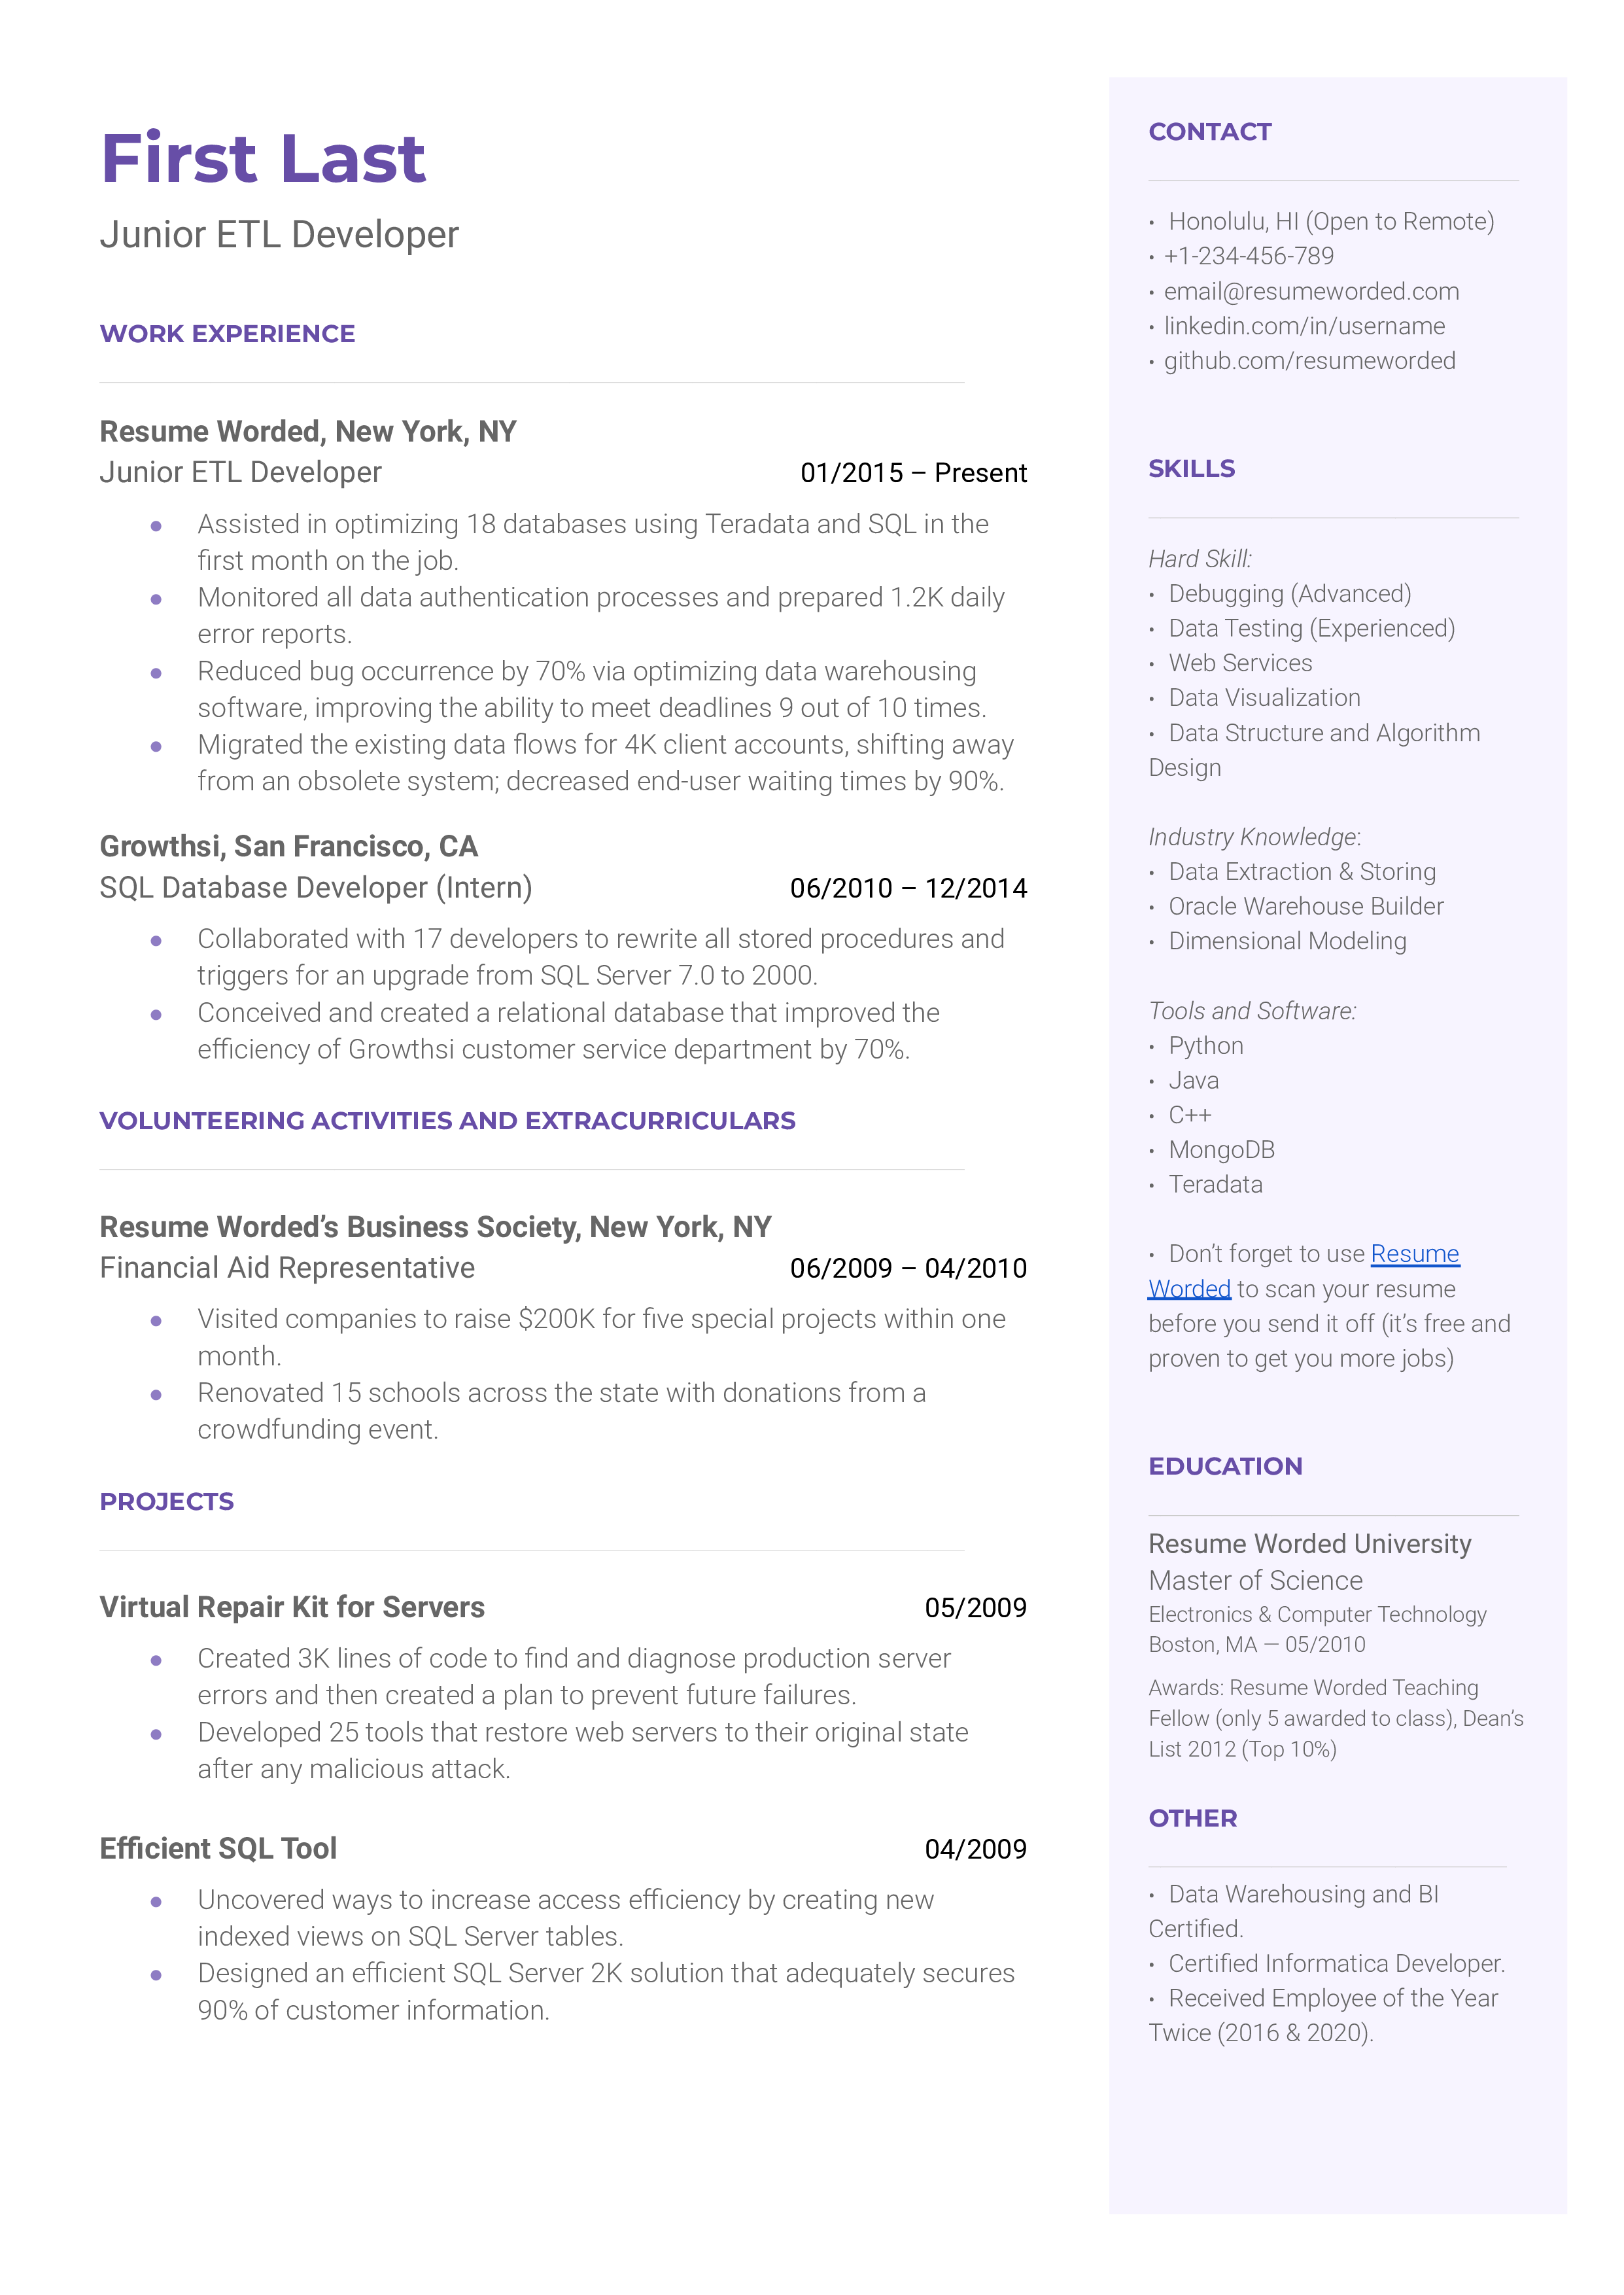 A structured CV for a Junior ETL Developer showcasing technical skills and understanding of data security.